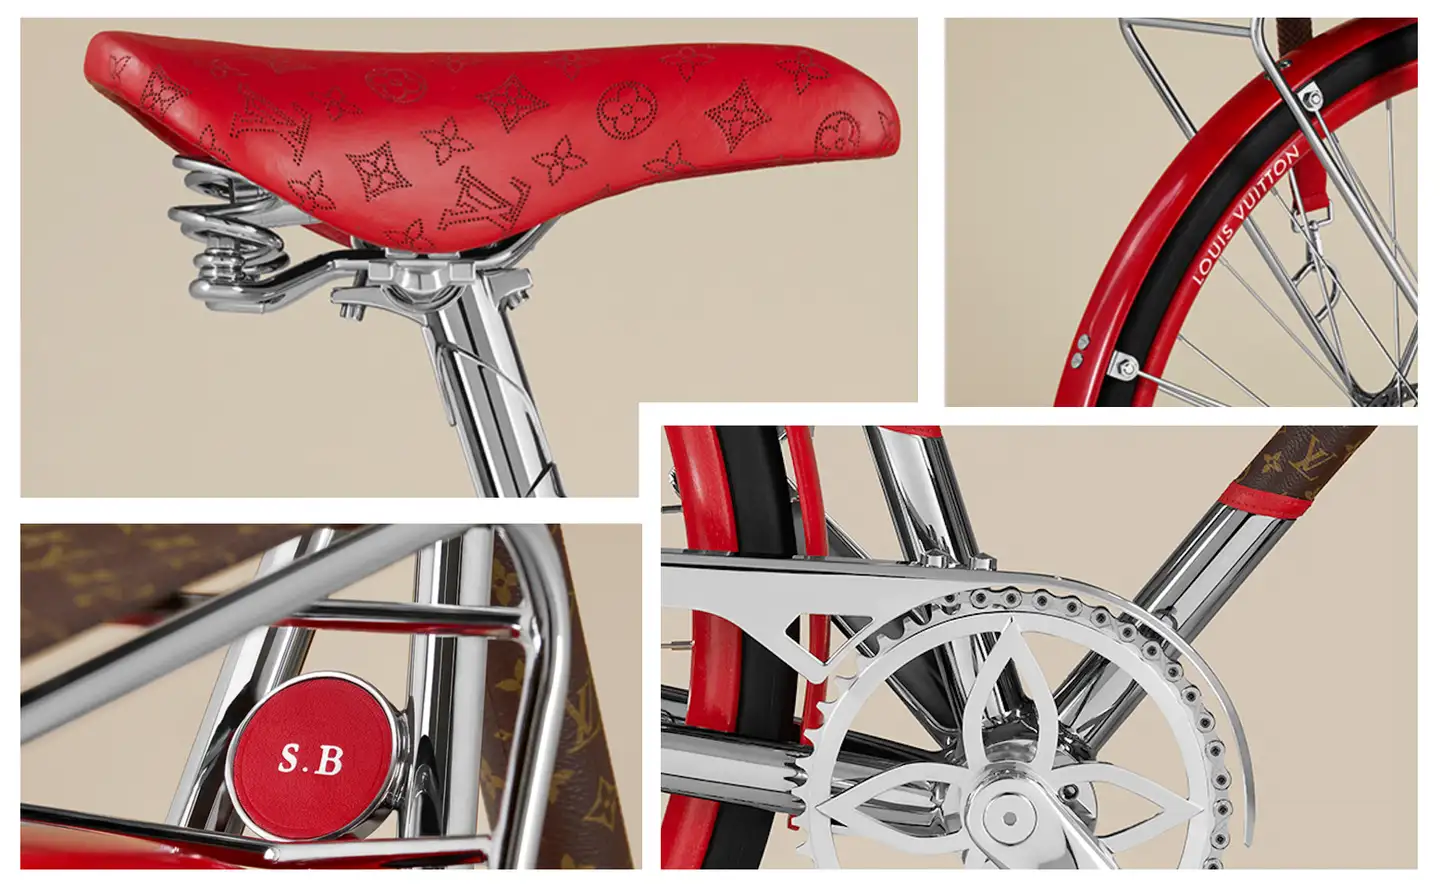 Maison Tamboite x Louis Vuitton Bike is here to re-define cycling